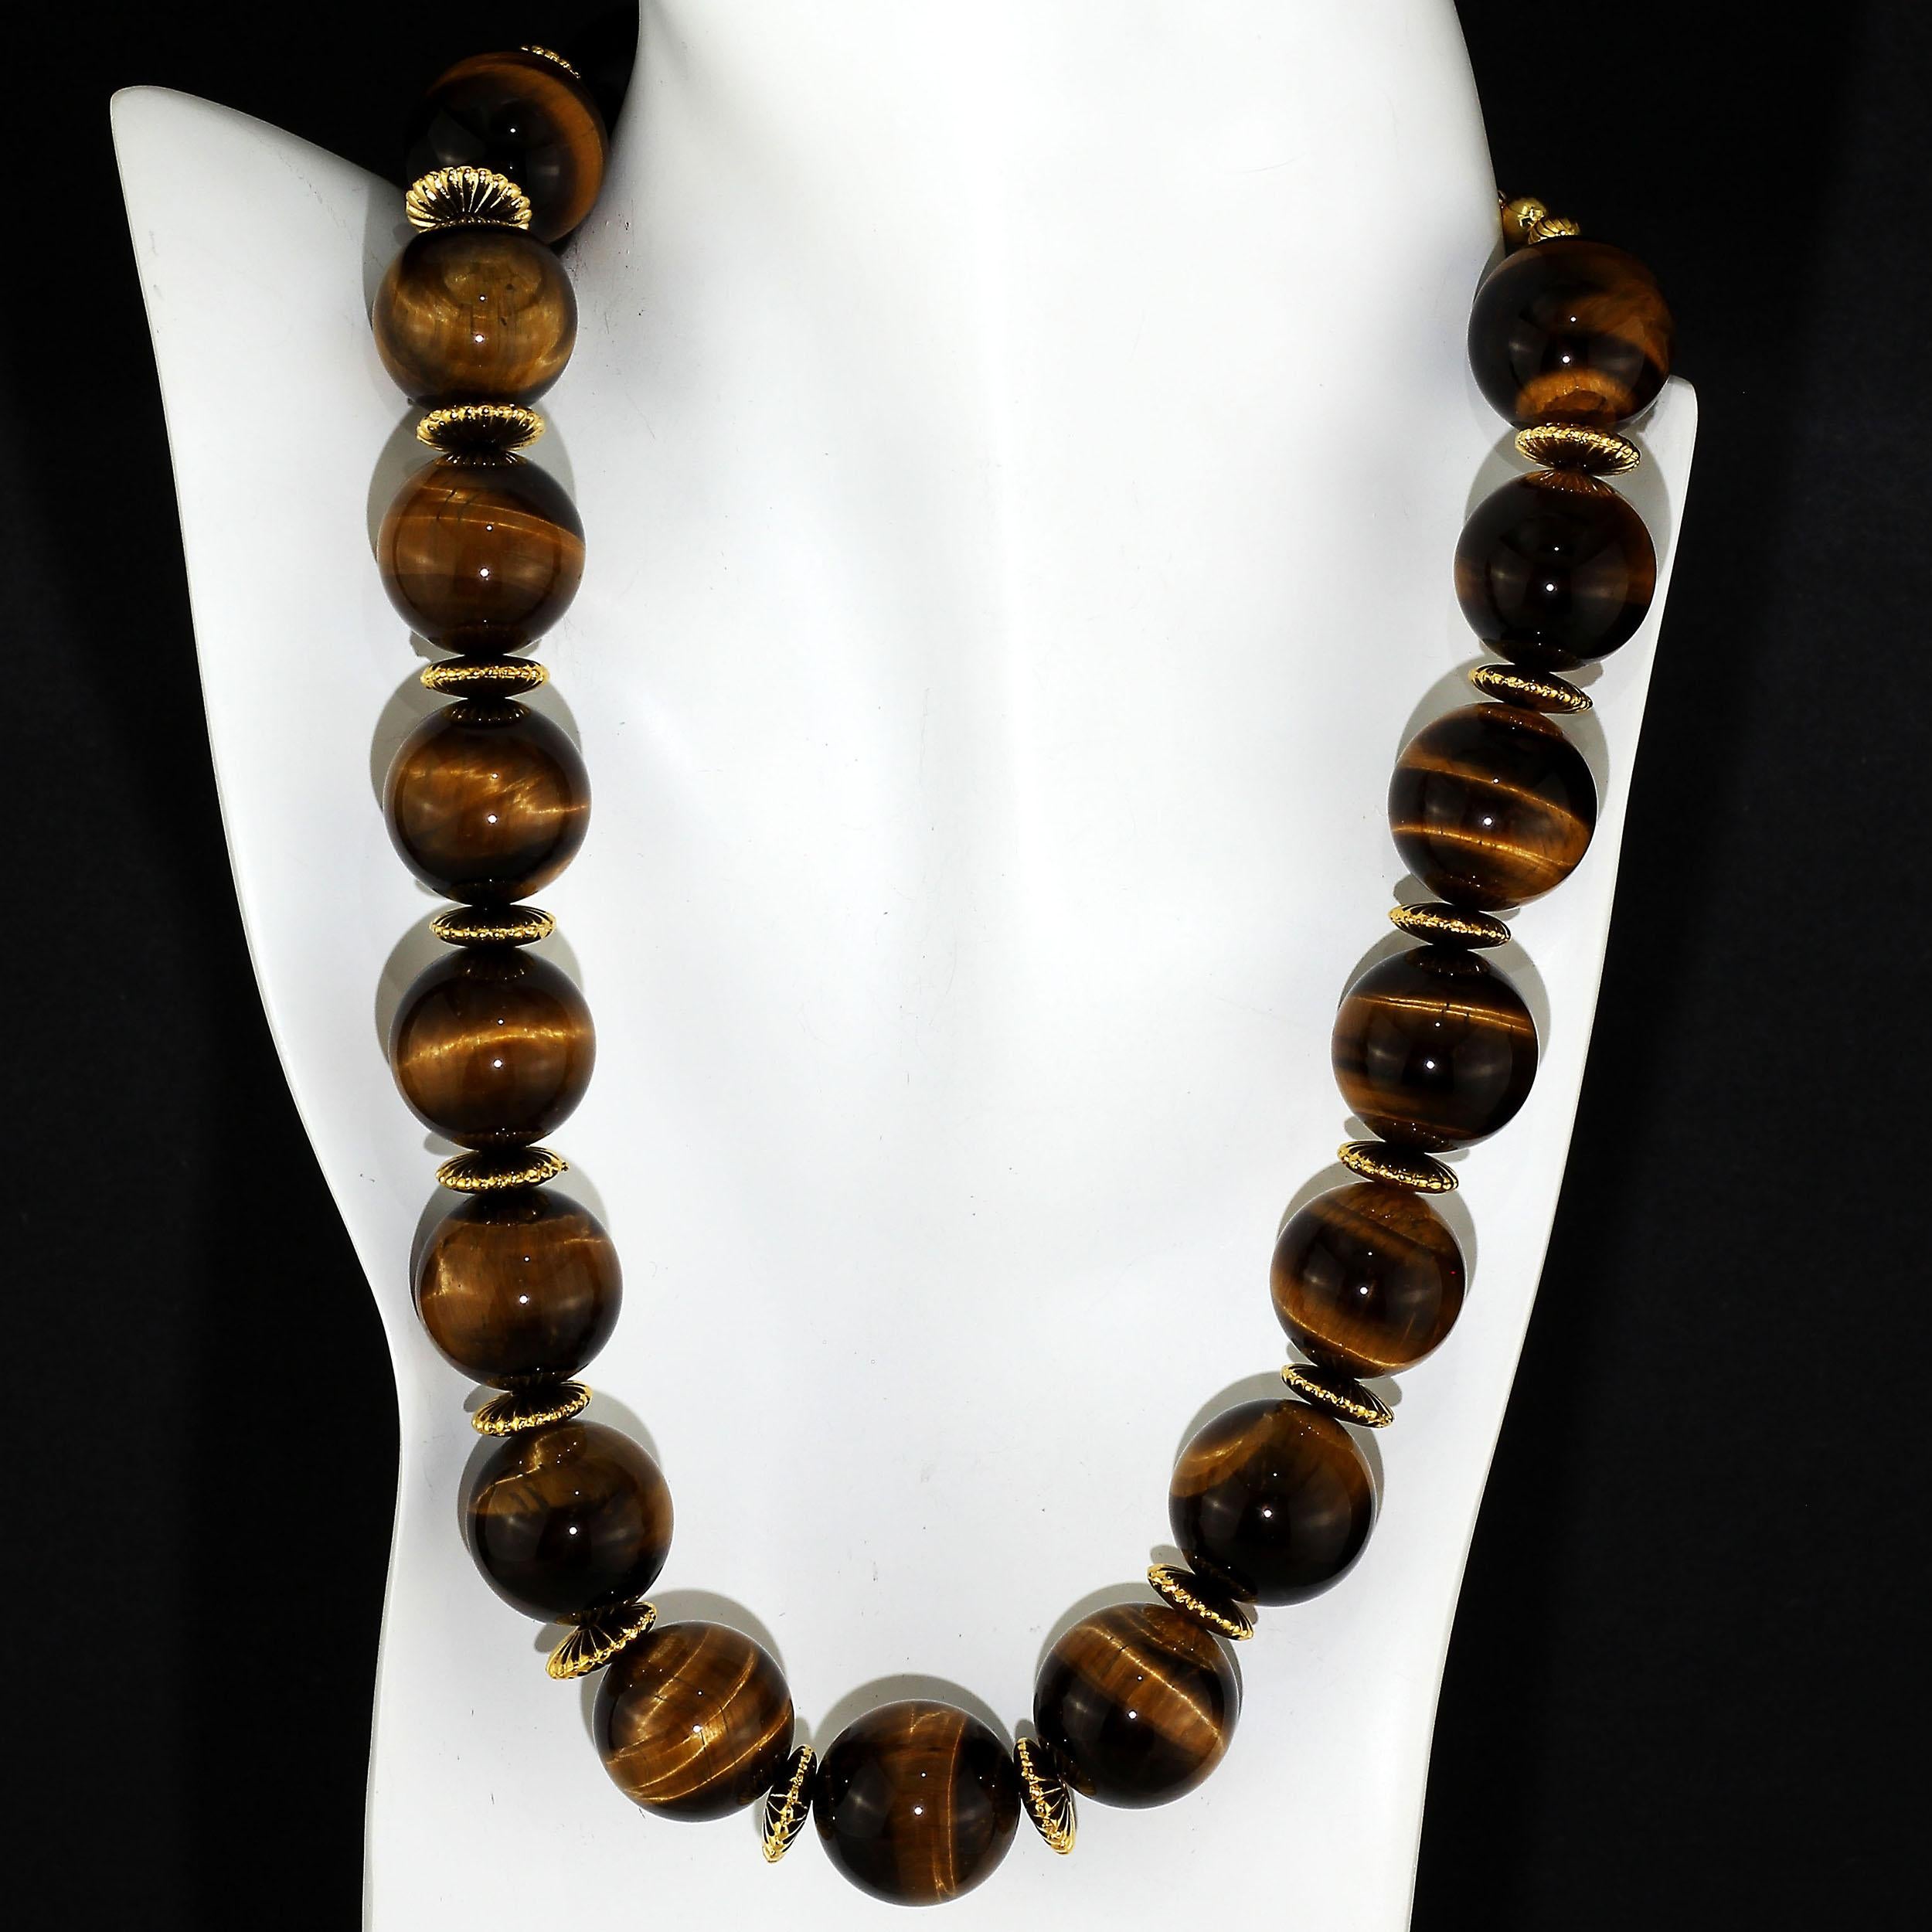 Bead AJD Statement Necklace of Magnificent Glowing Tiger's Eye